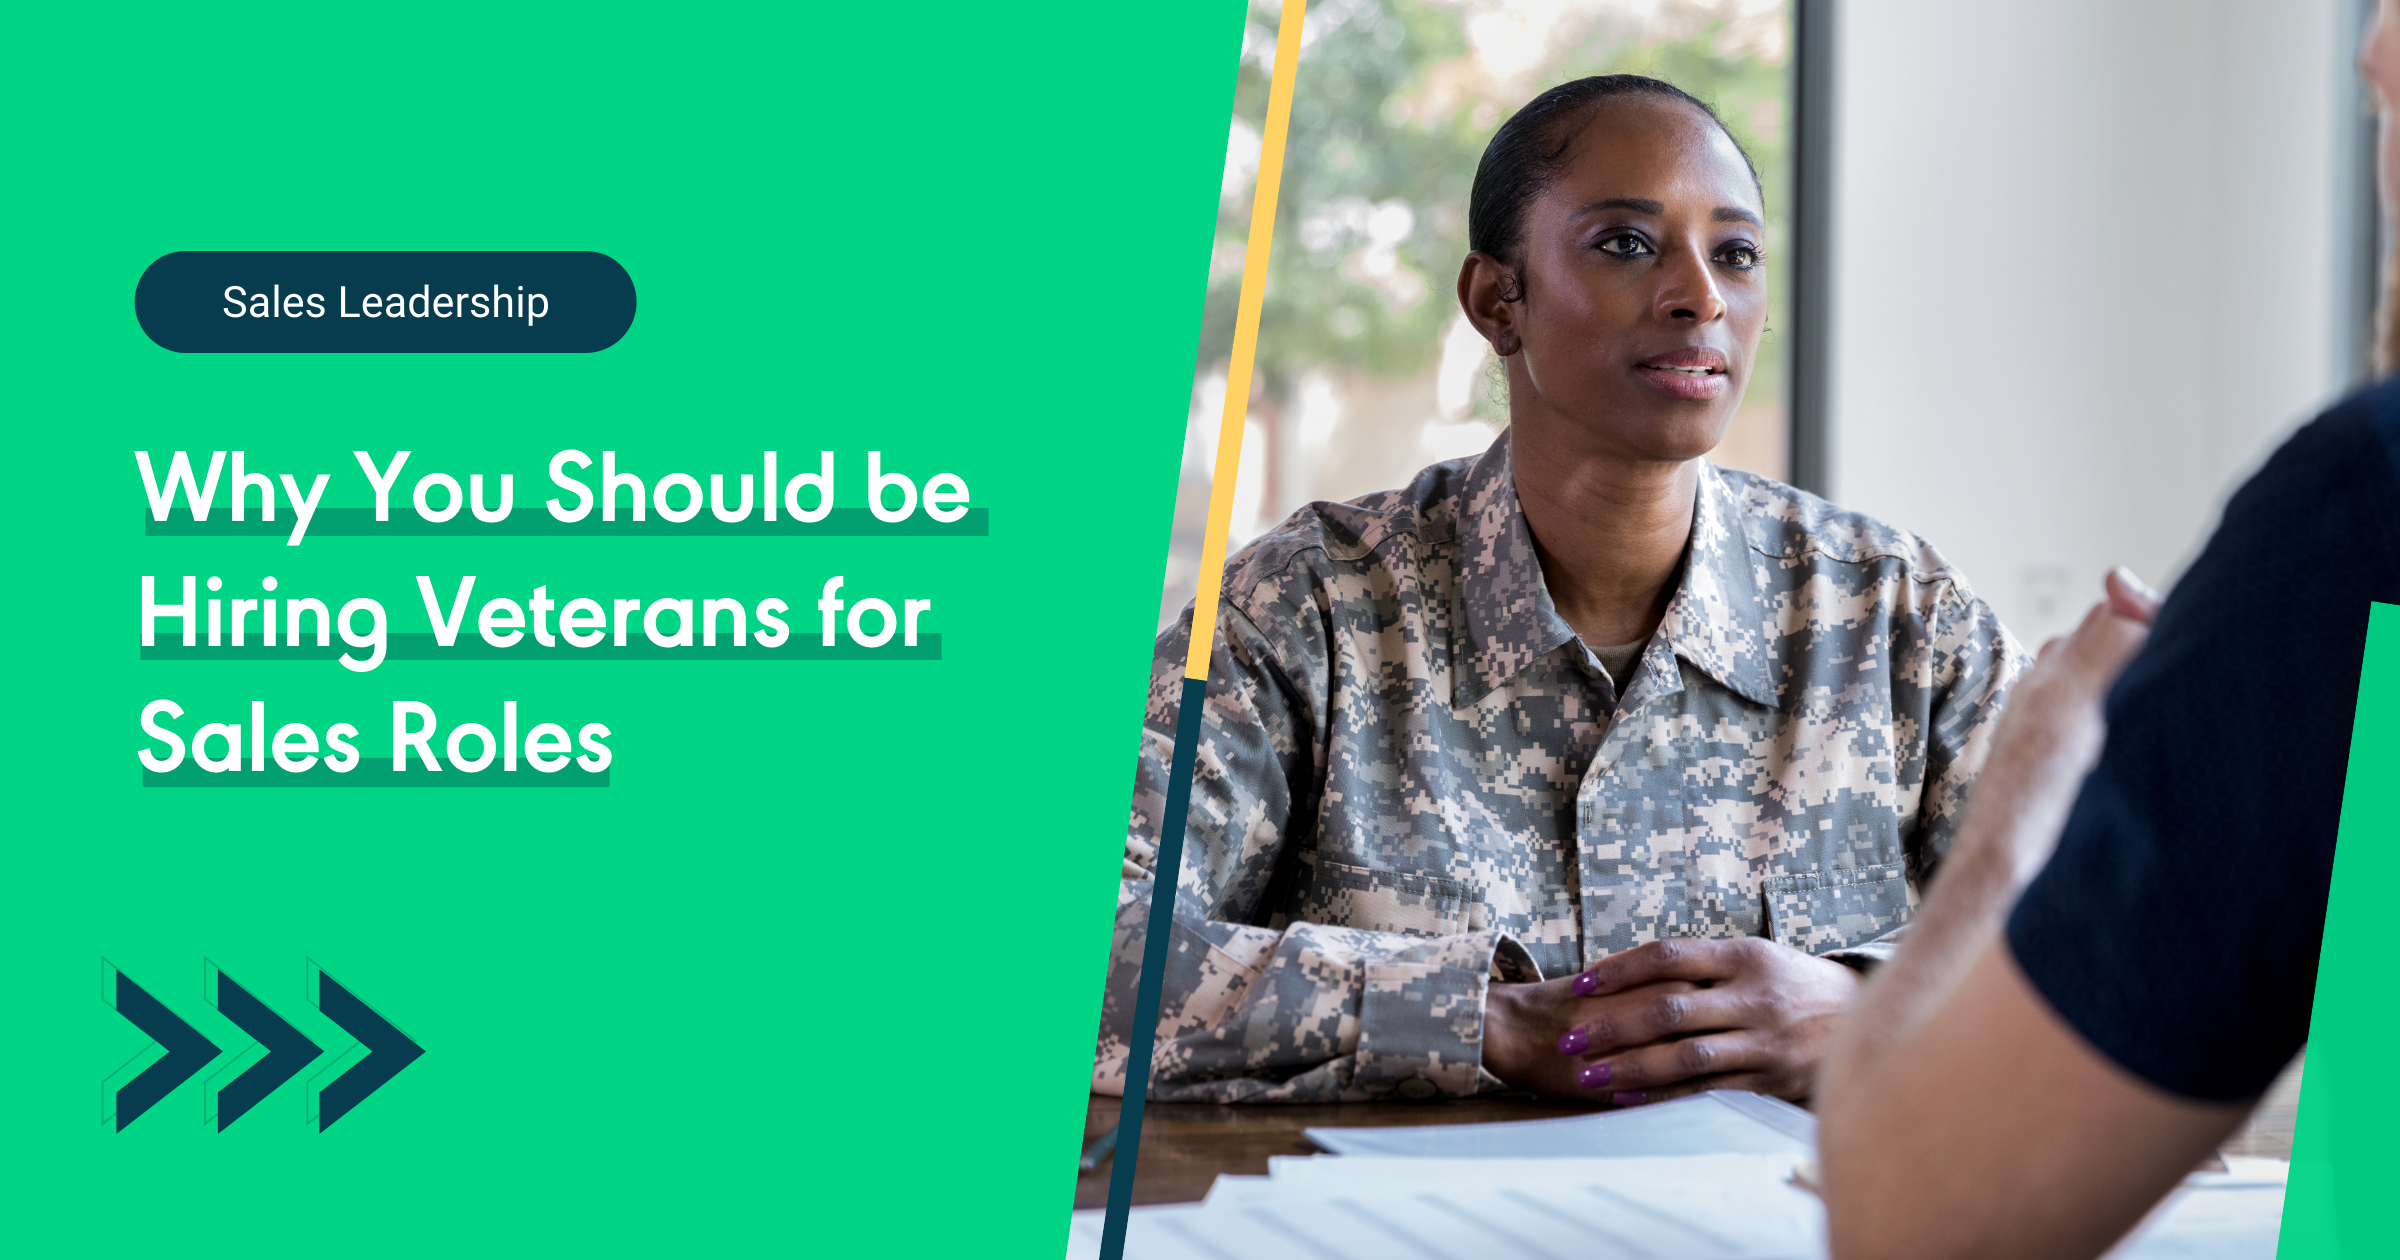 Why You Should Hire Veterans for Sales Roles